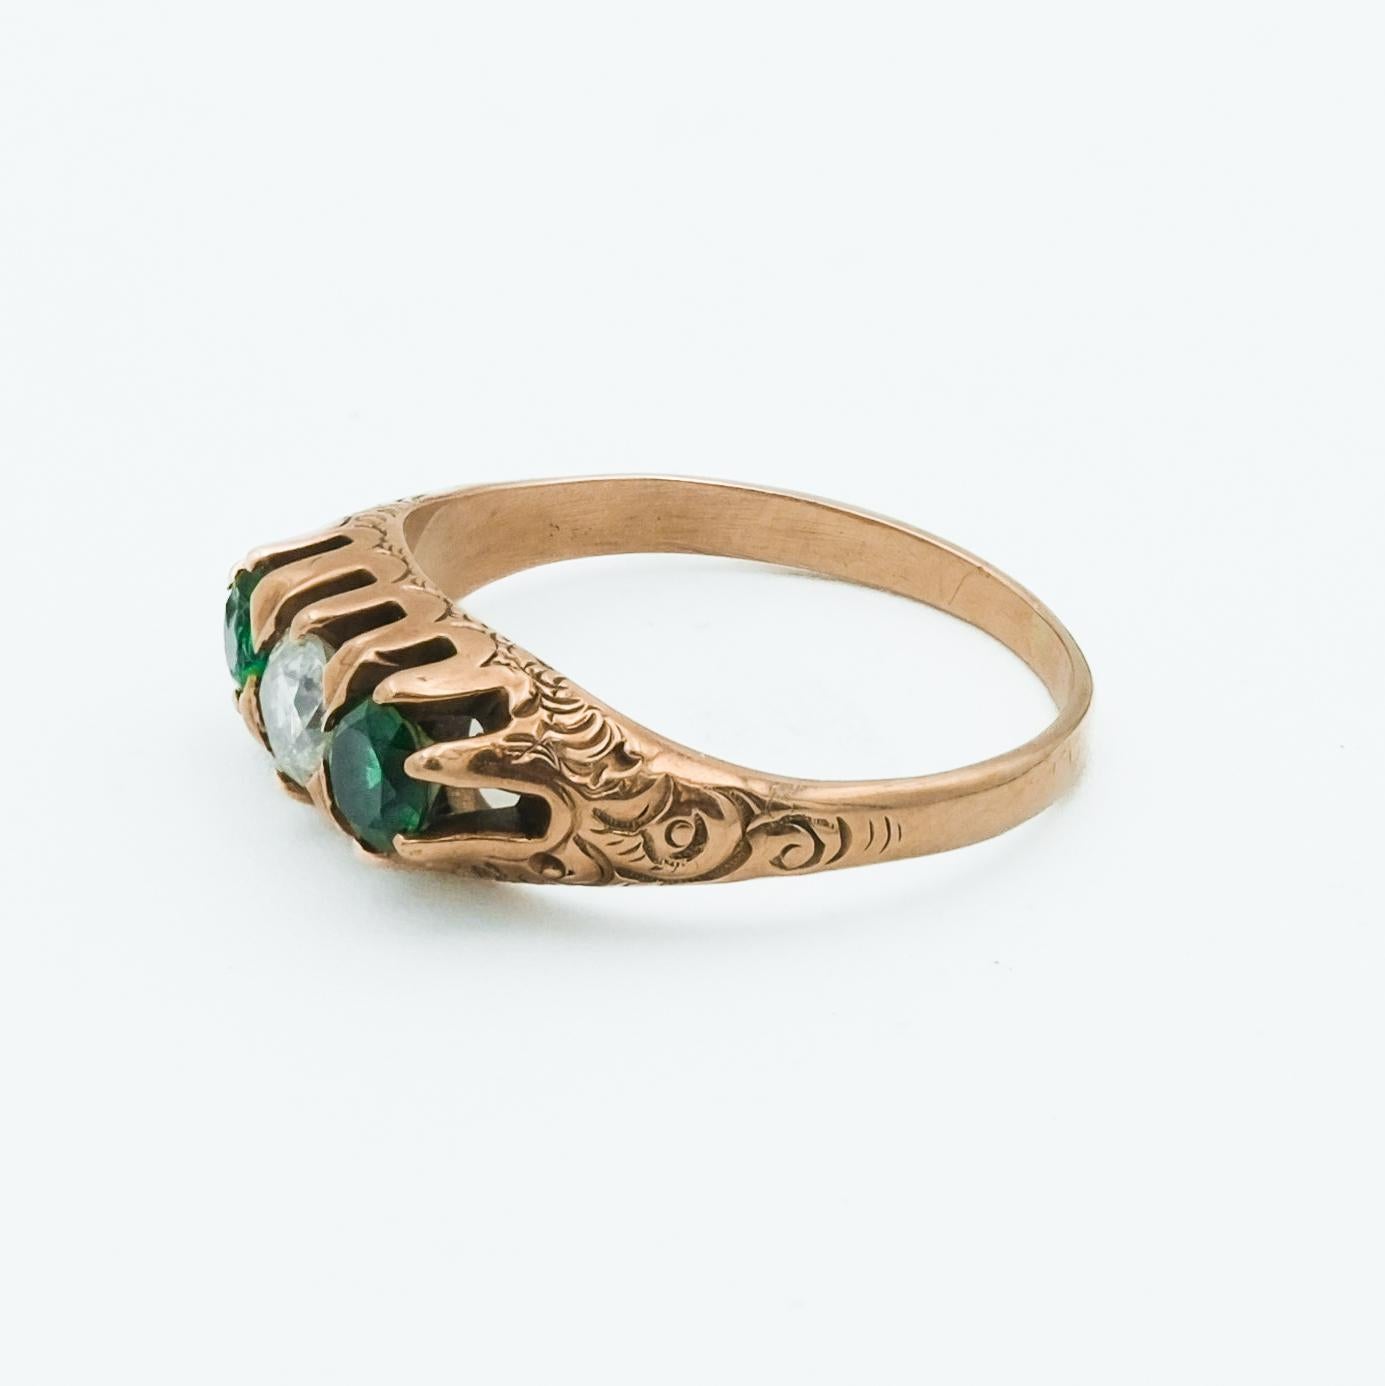 This 10 karat rose gold Victorian ring features a timeless three-stone design with an a diamond center in between two emeralds, a popular configuration during the Victorian era. The emeralds, known for its vibrant green color, symbolizes rebirth and